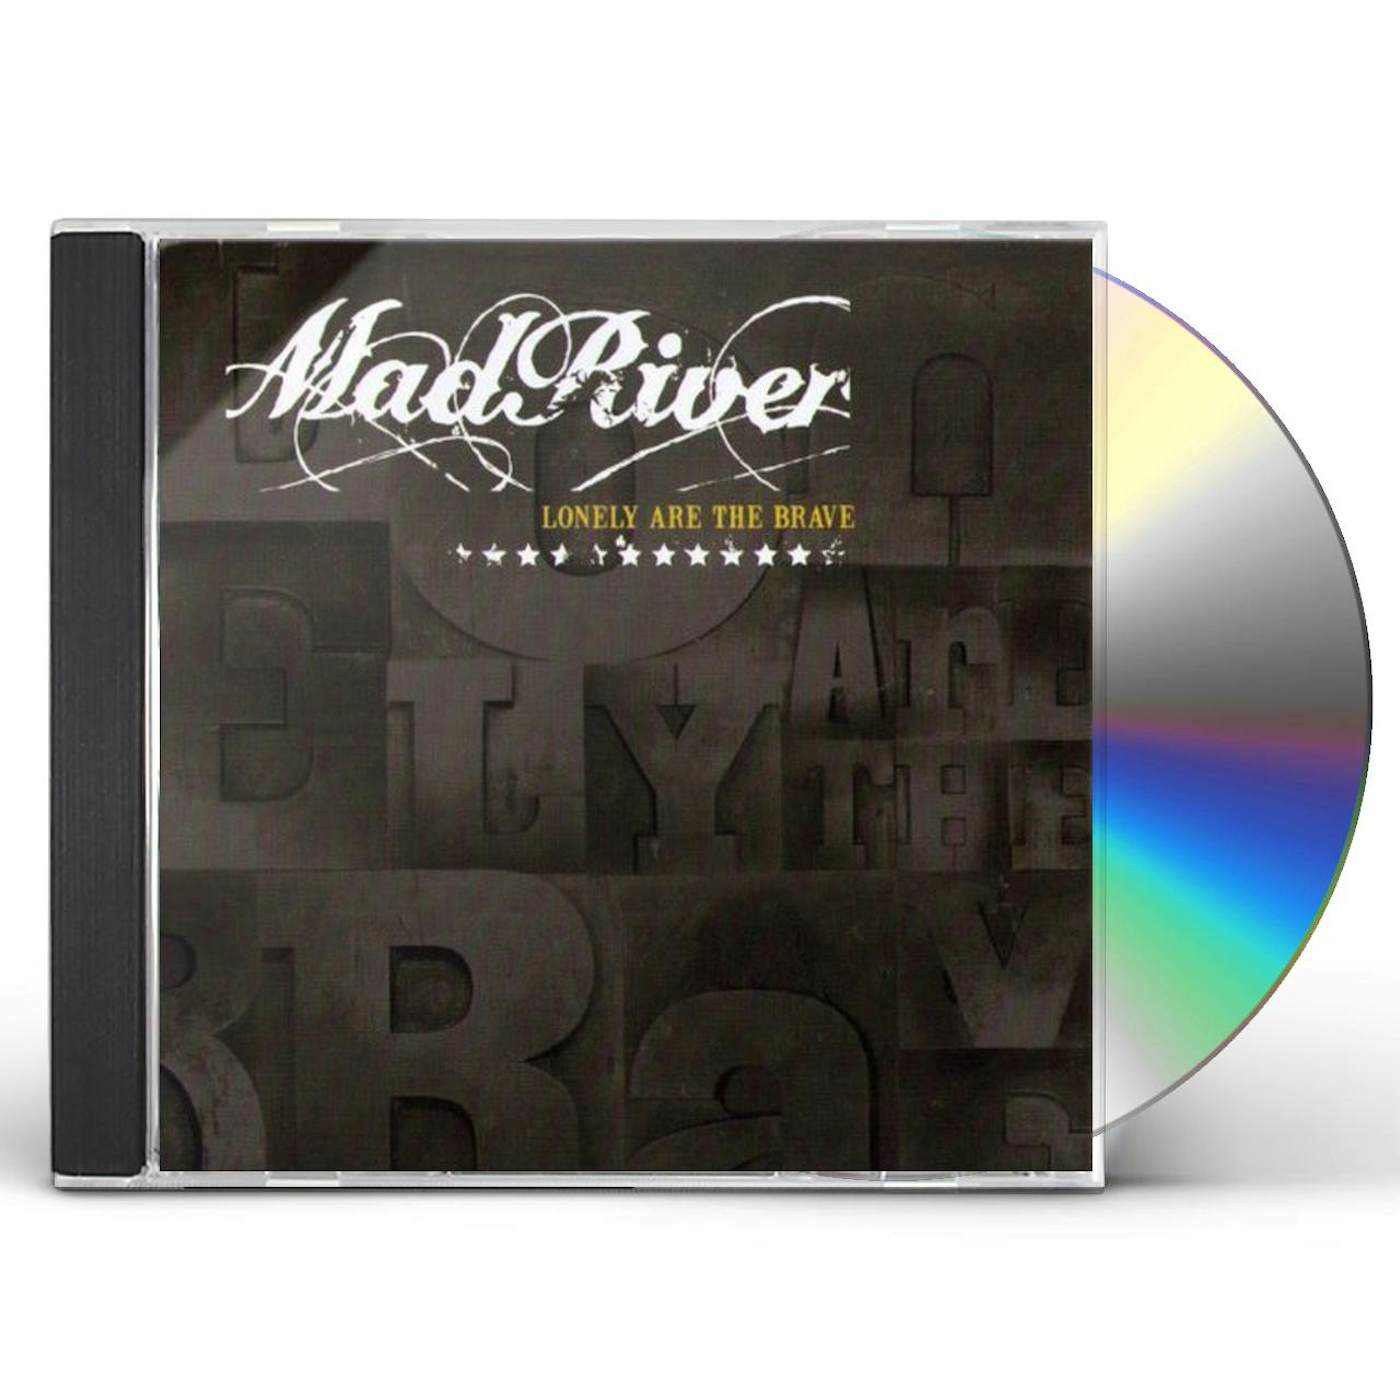 Mad River Lonely Are The Brave CD